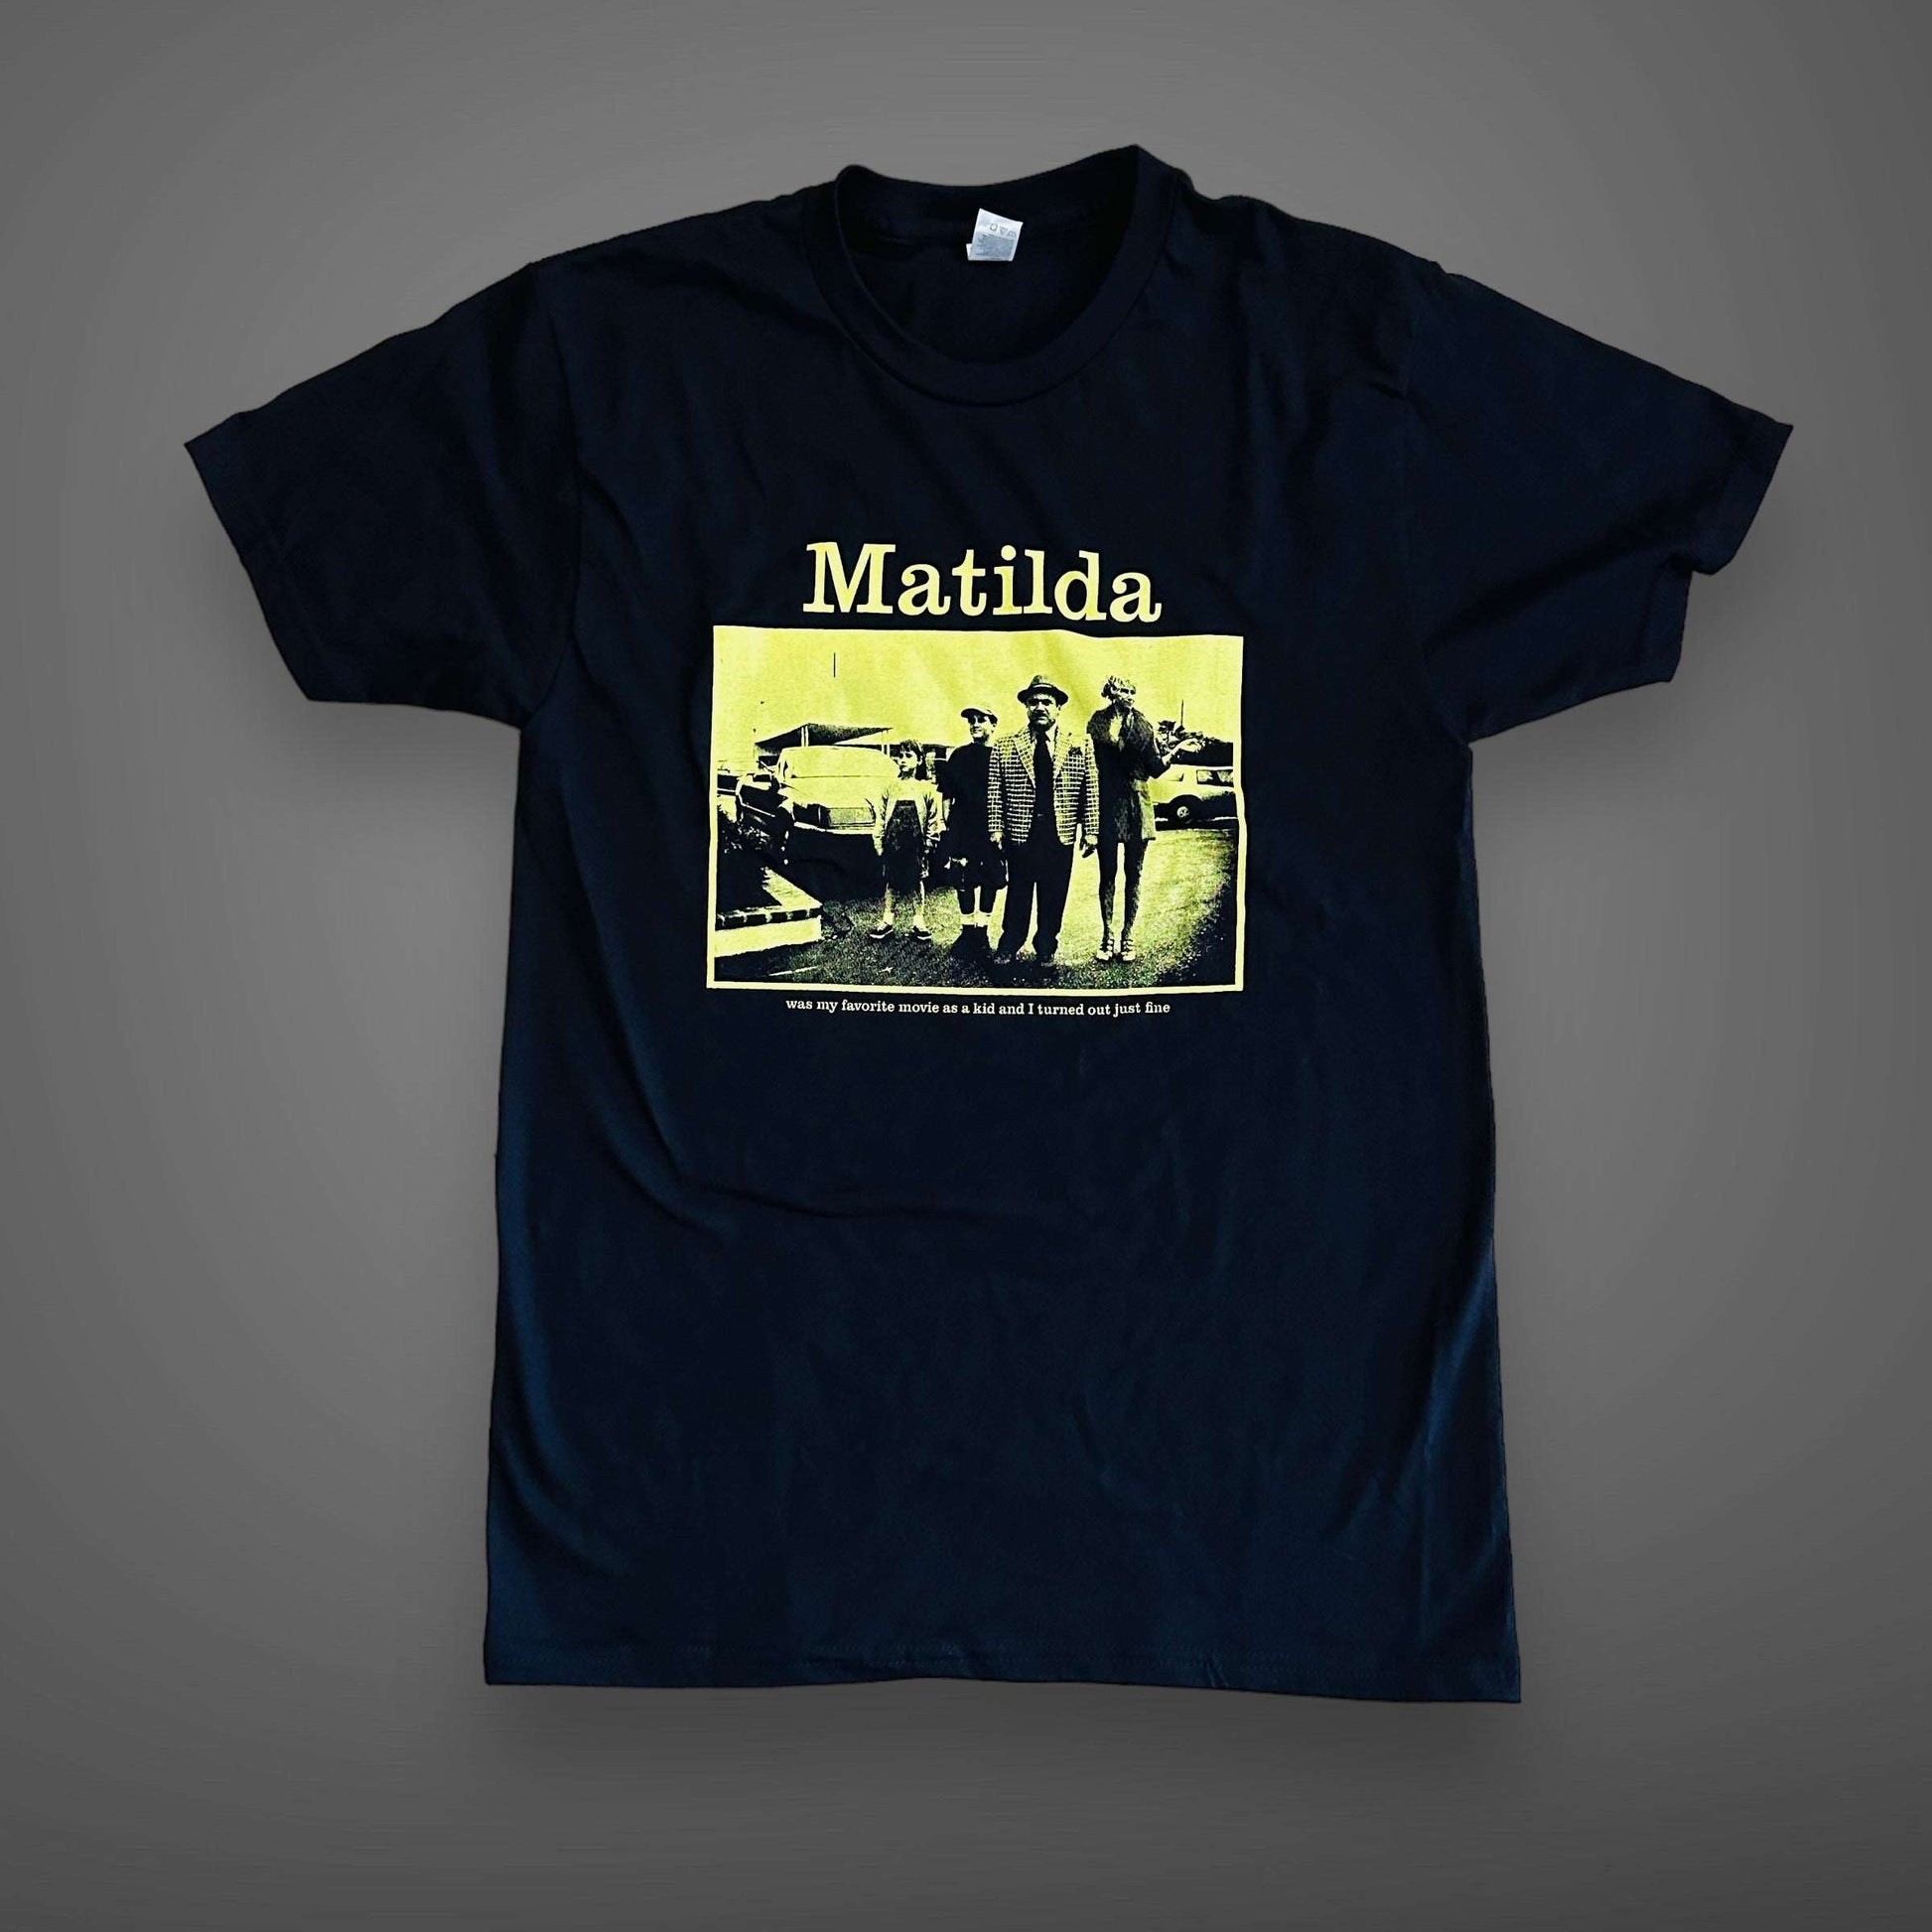 Matilda was my favorite movie as a kid and I turned out just fine T-shirt